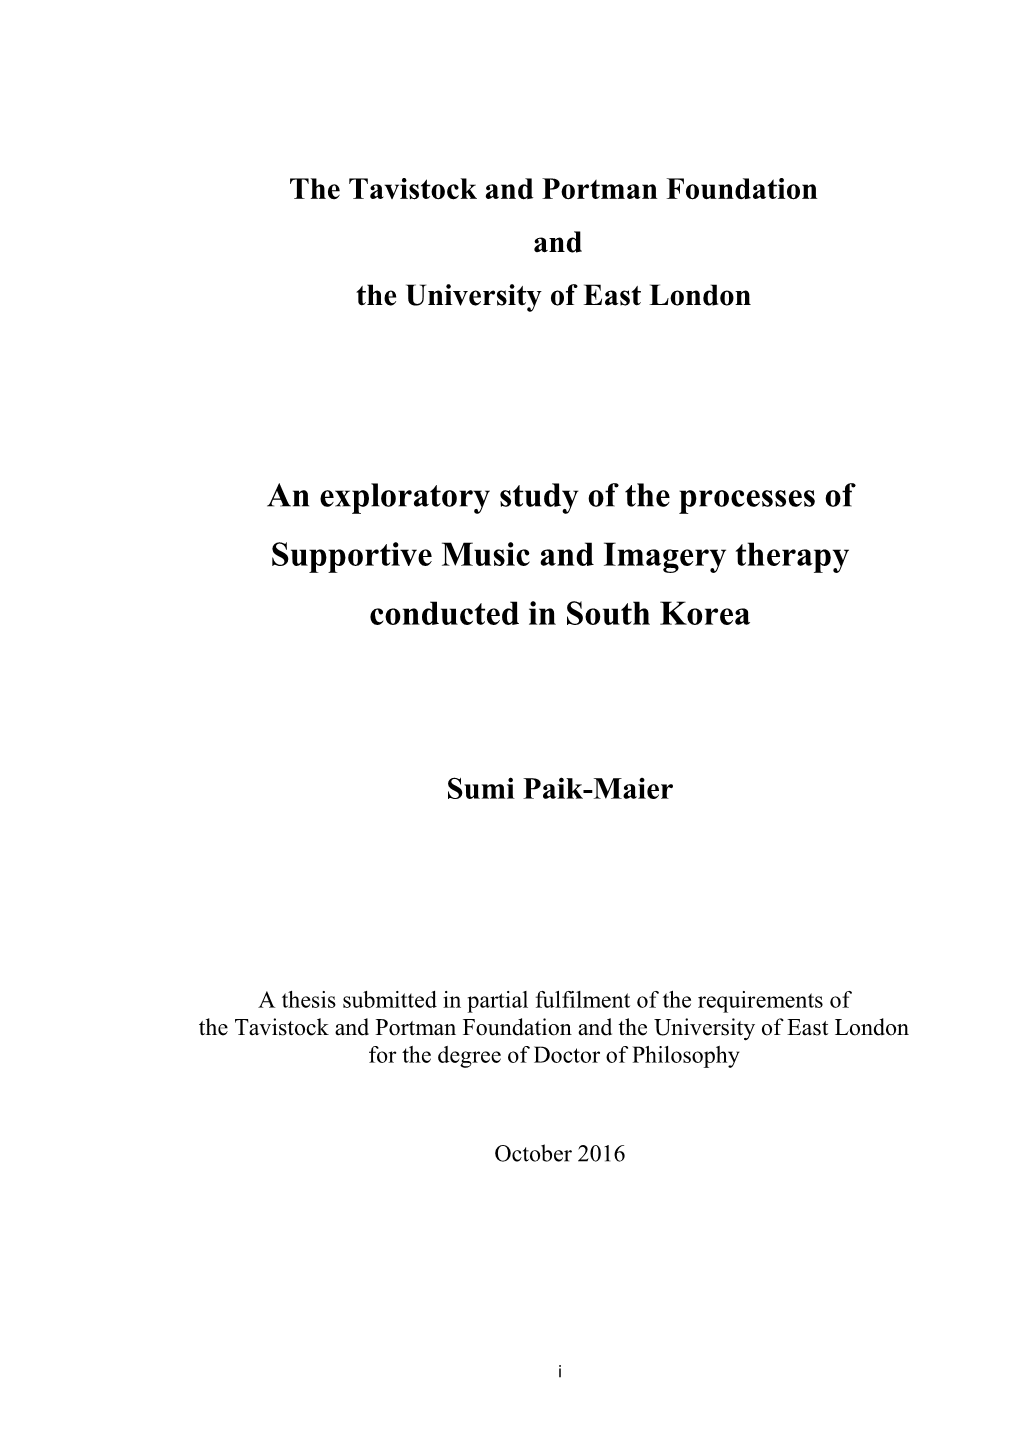 An Exploratory Study of the Processes of Supportive Music and Imagery Therapy Conducted in South Korea